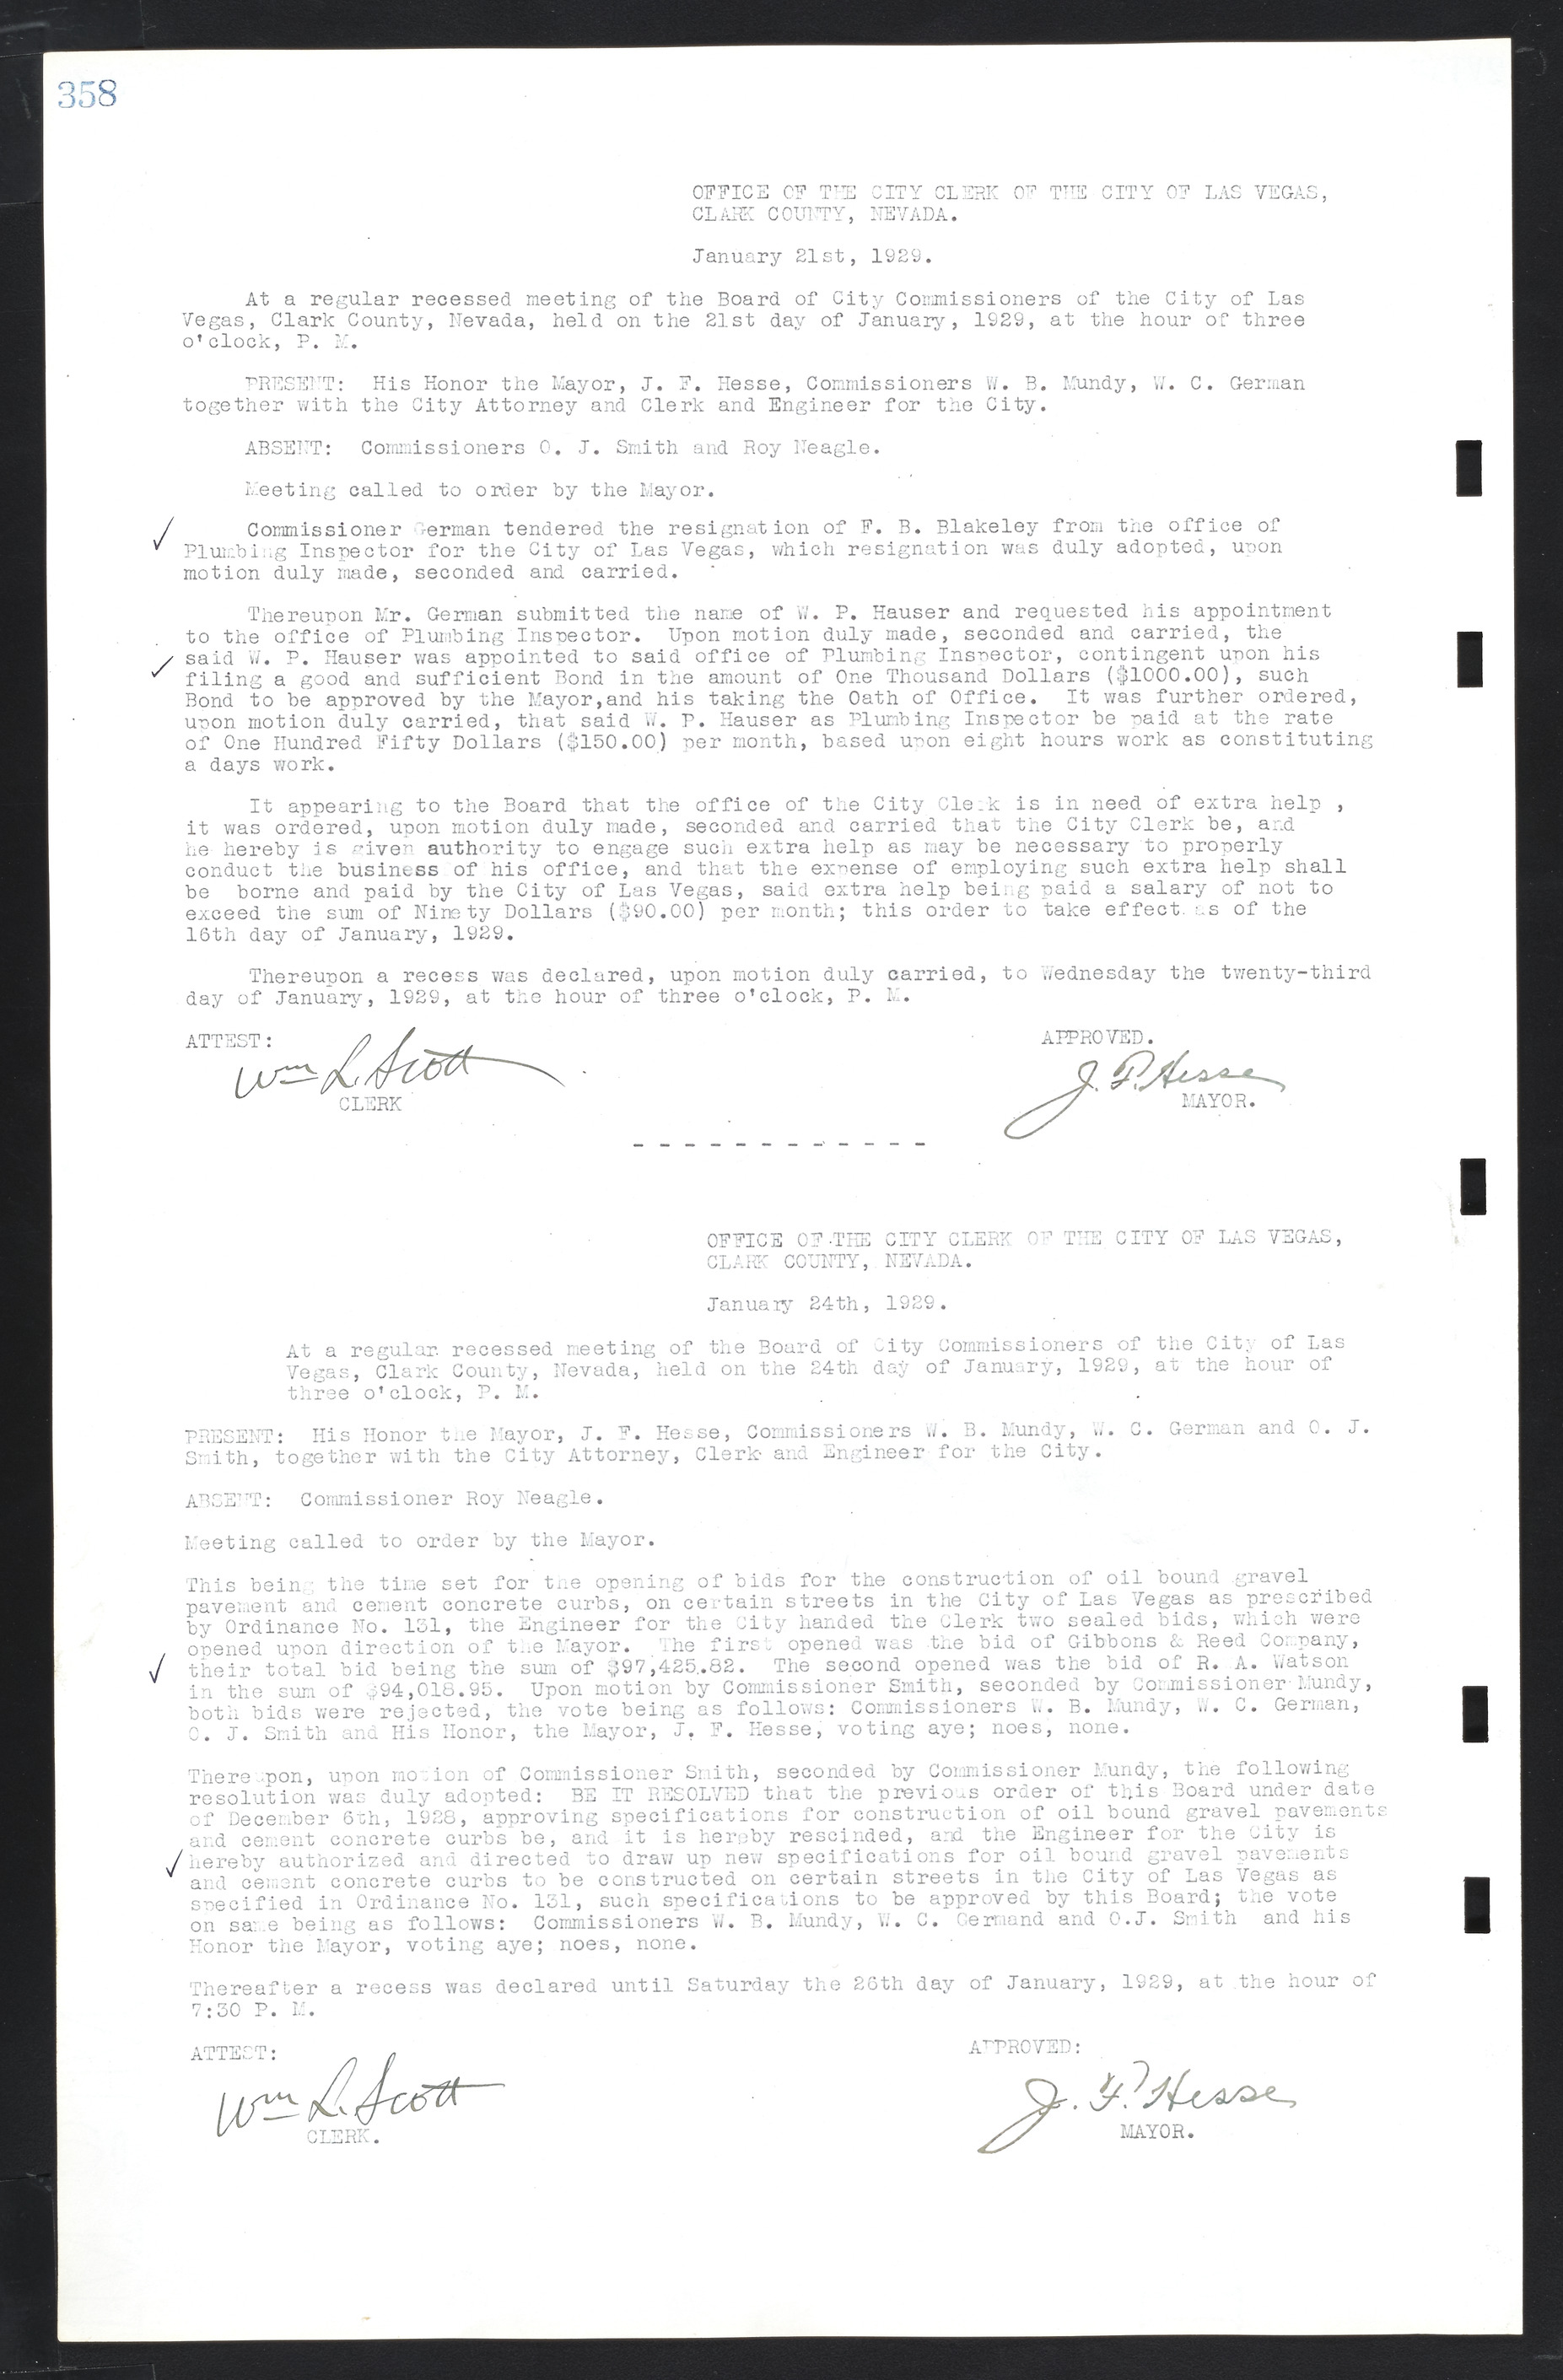 Las Vegas City Commission Minutes, March 1, 1922 to May 10, 1929, lvc000002-367